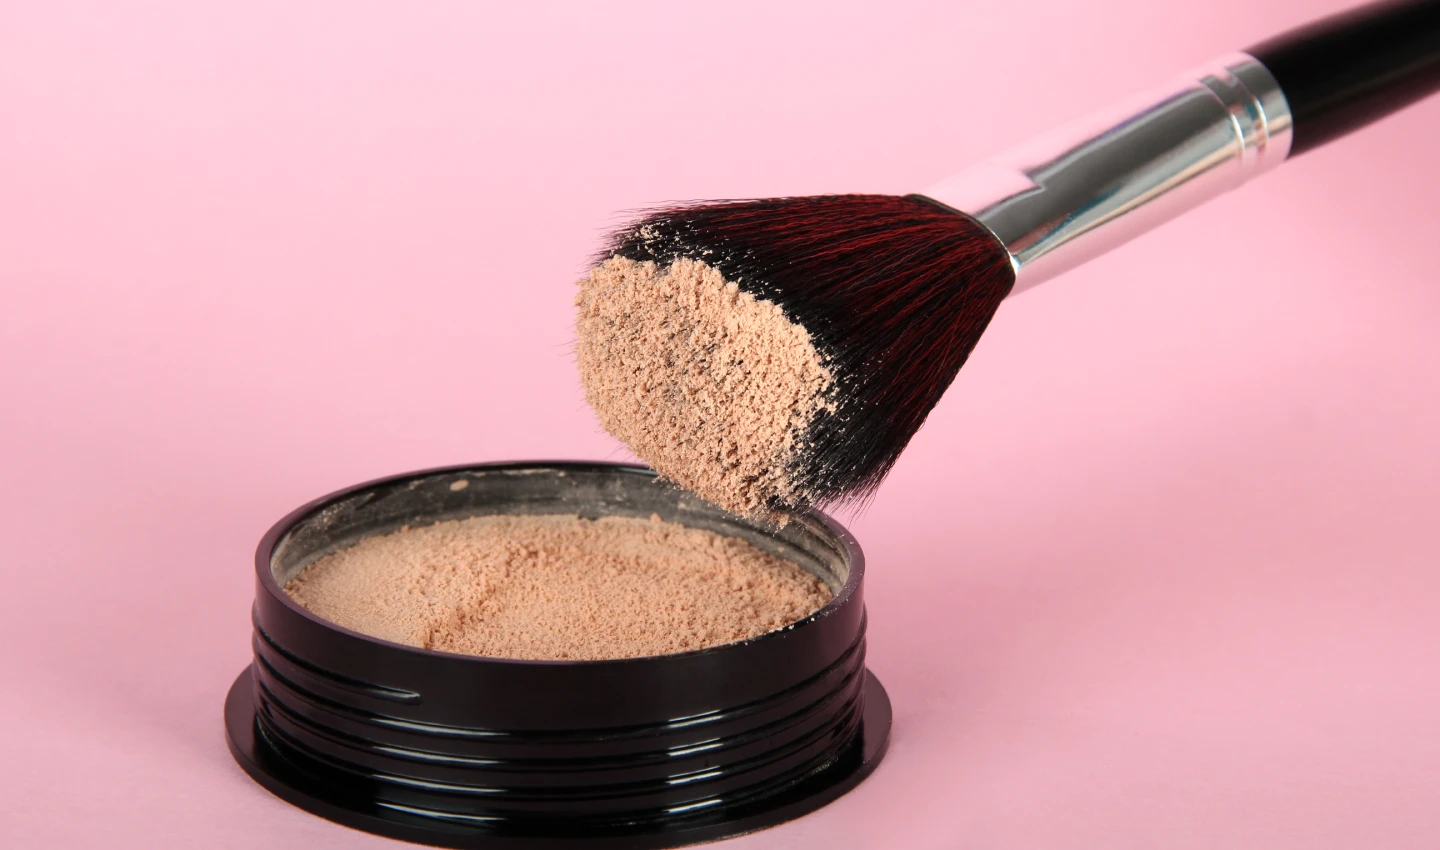 Setting Powder: A container of face powder with a makeup brush placed beside it